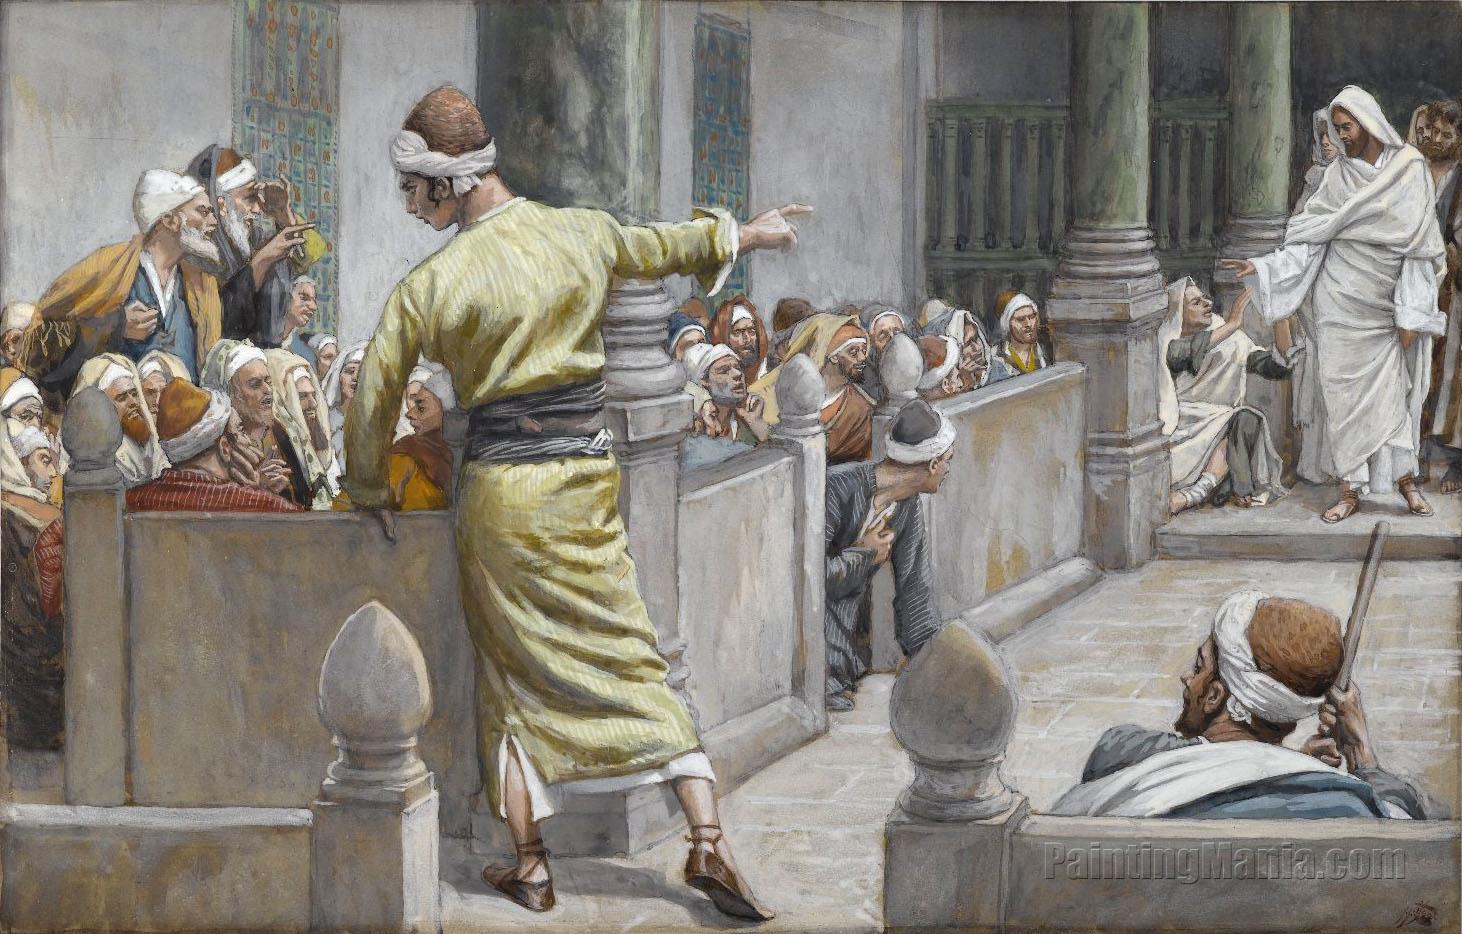 The Healed Blind Man Tells His Story to the Jews